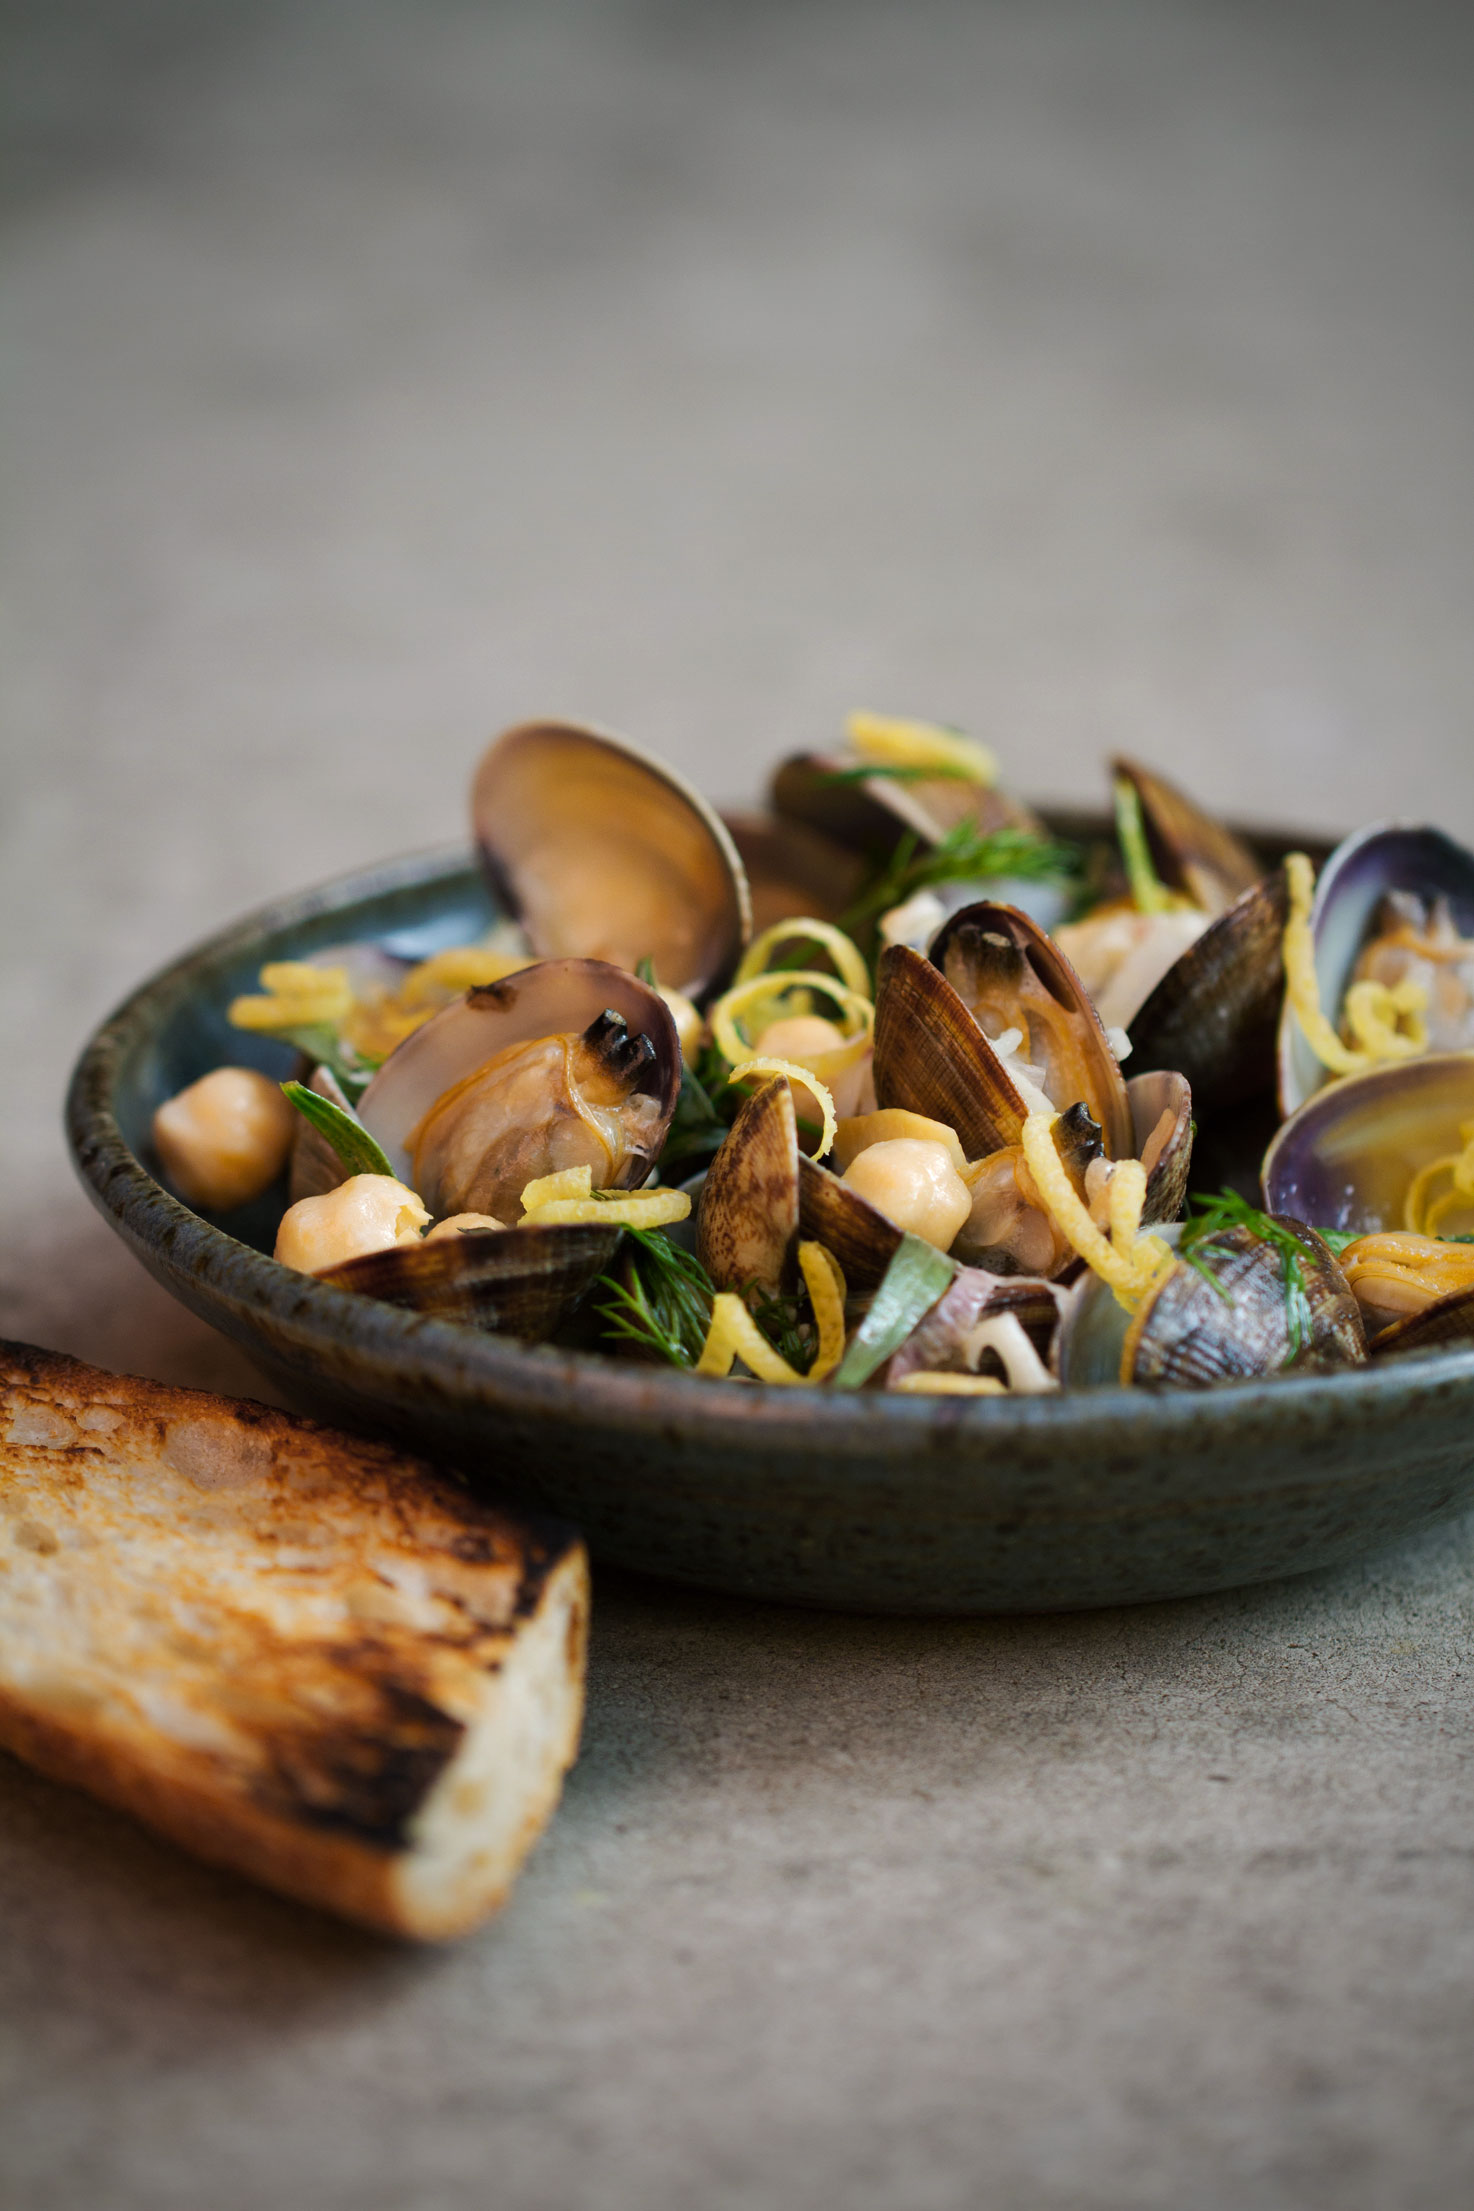 Steamed Clams with Chickpeas and Green Garlic